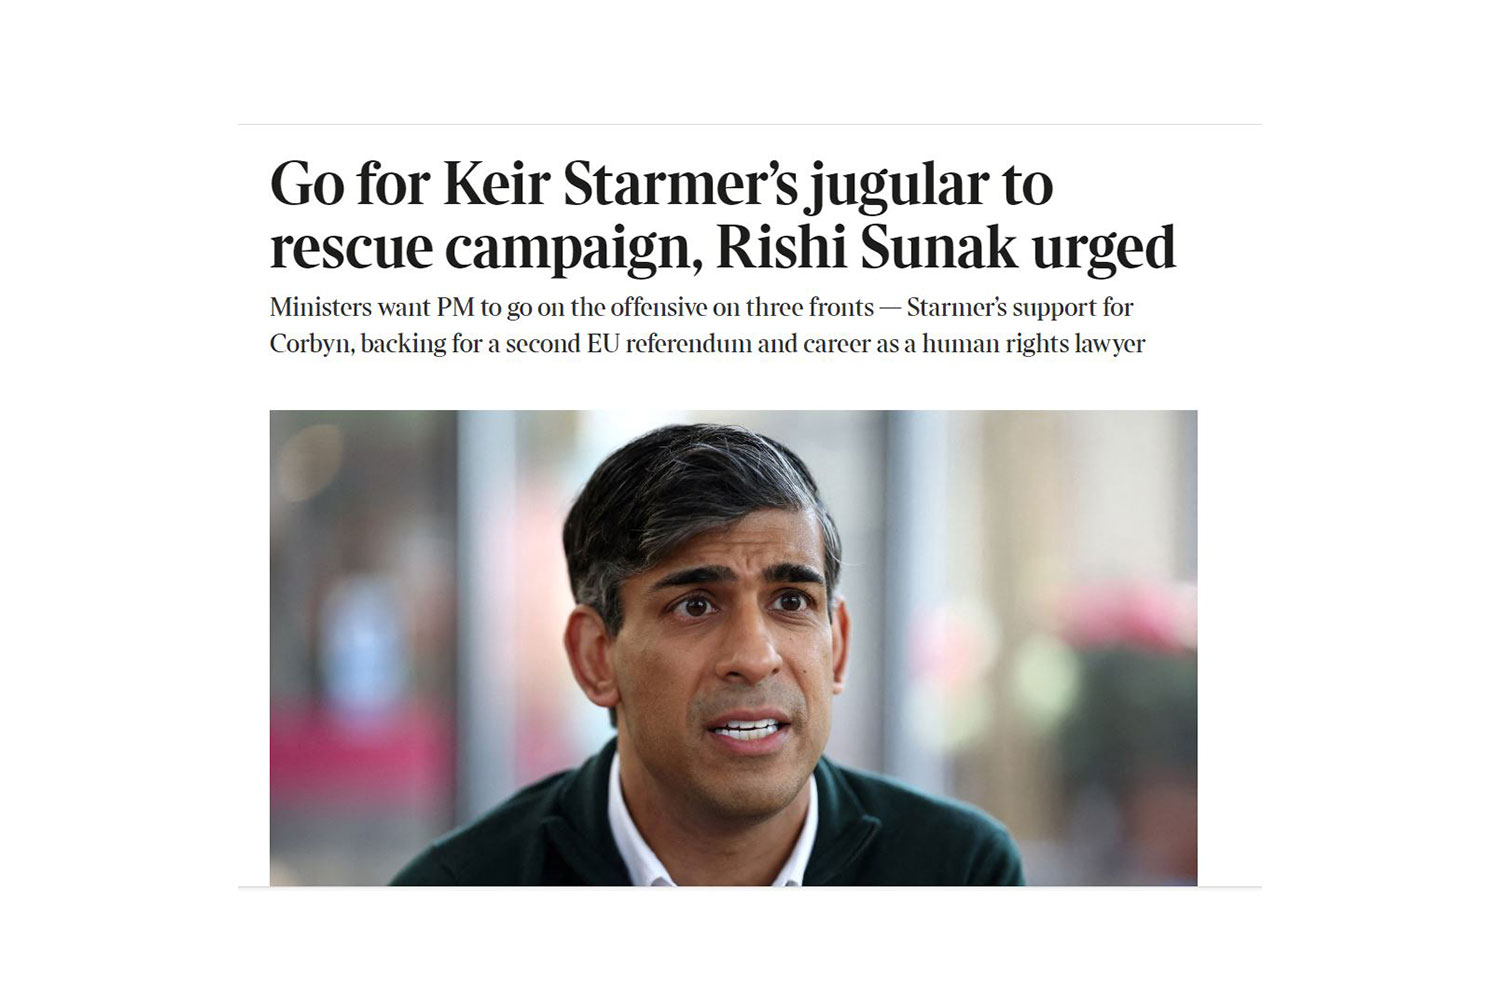 A screen grab of a news paper report with a headline and picture. The headline reads: 'Go for Keir Starmer’s jugular to rescue campaign, Rishi Sunak urged'.